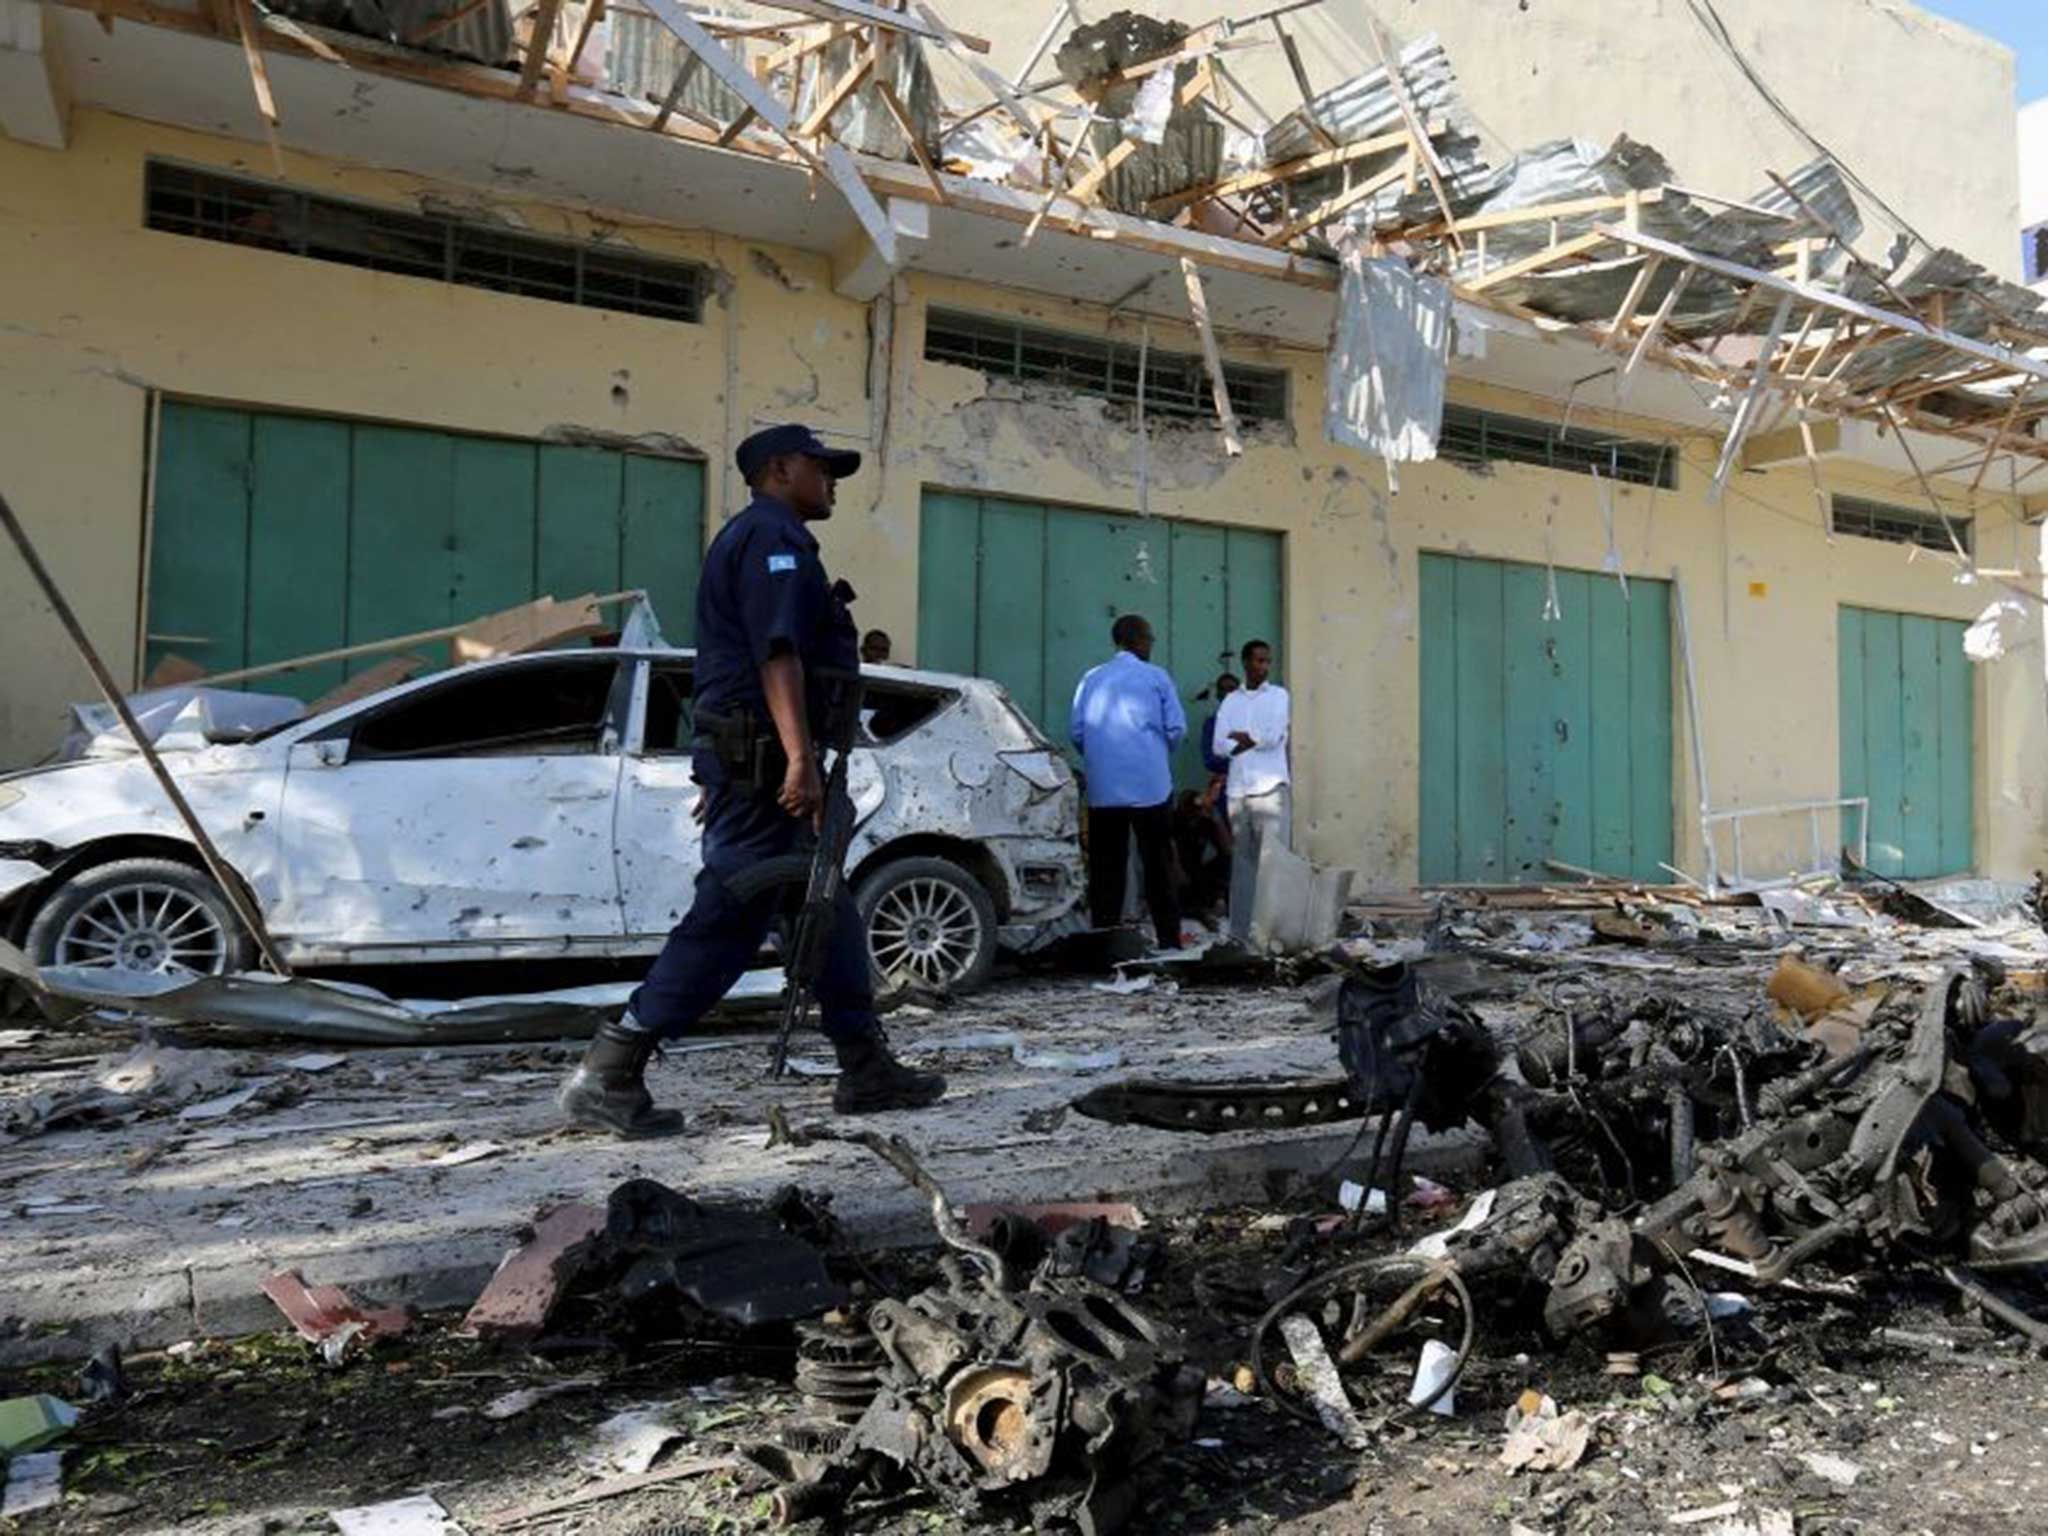 The aftermath of the bomb in Mogadishu